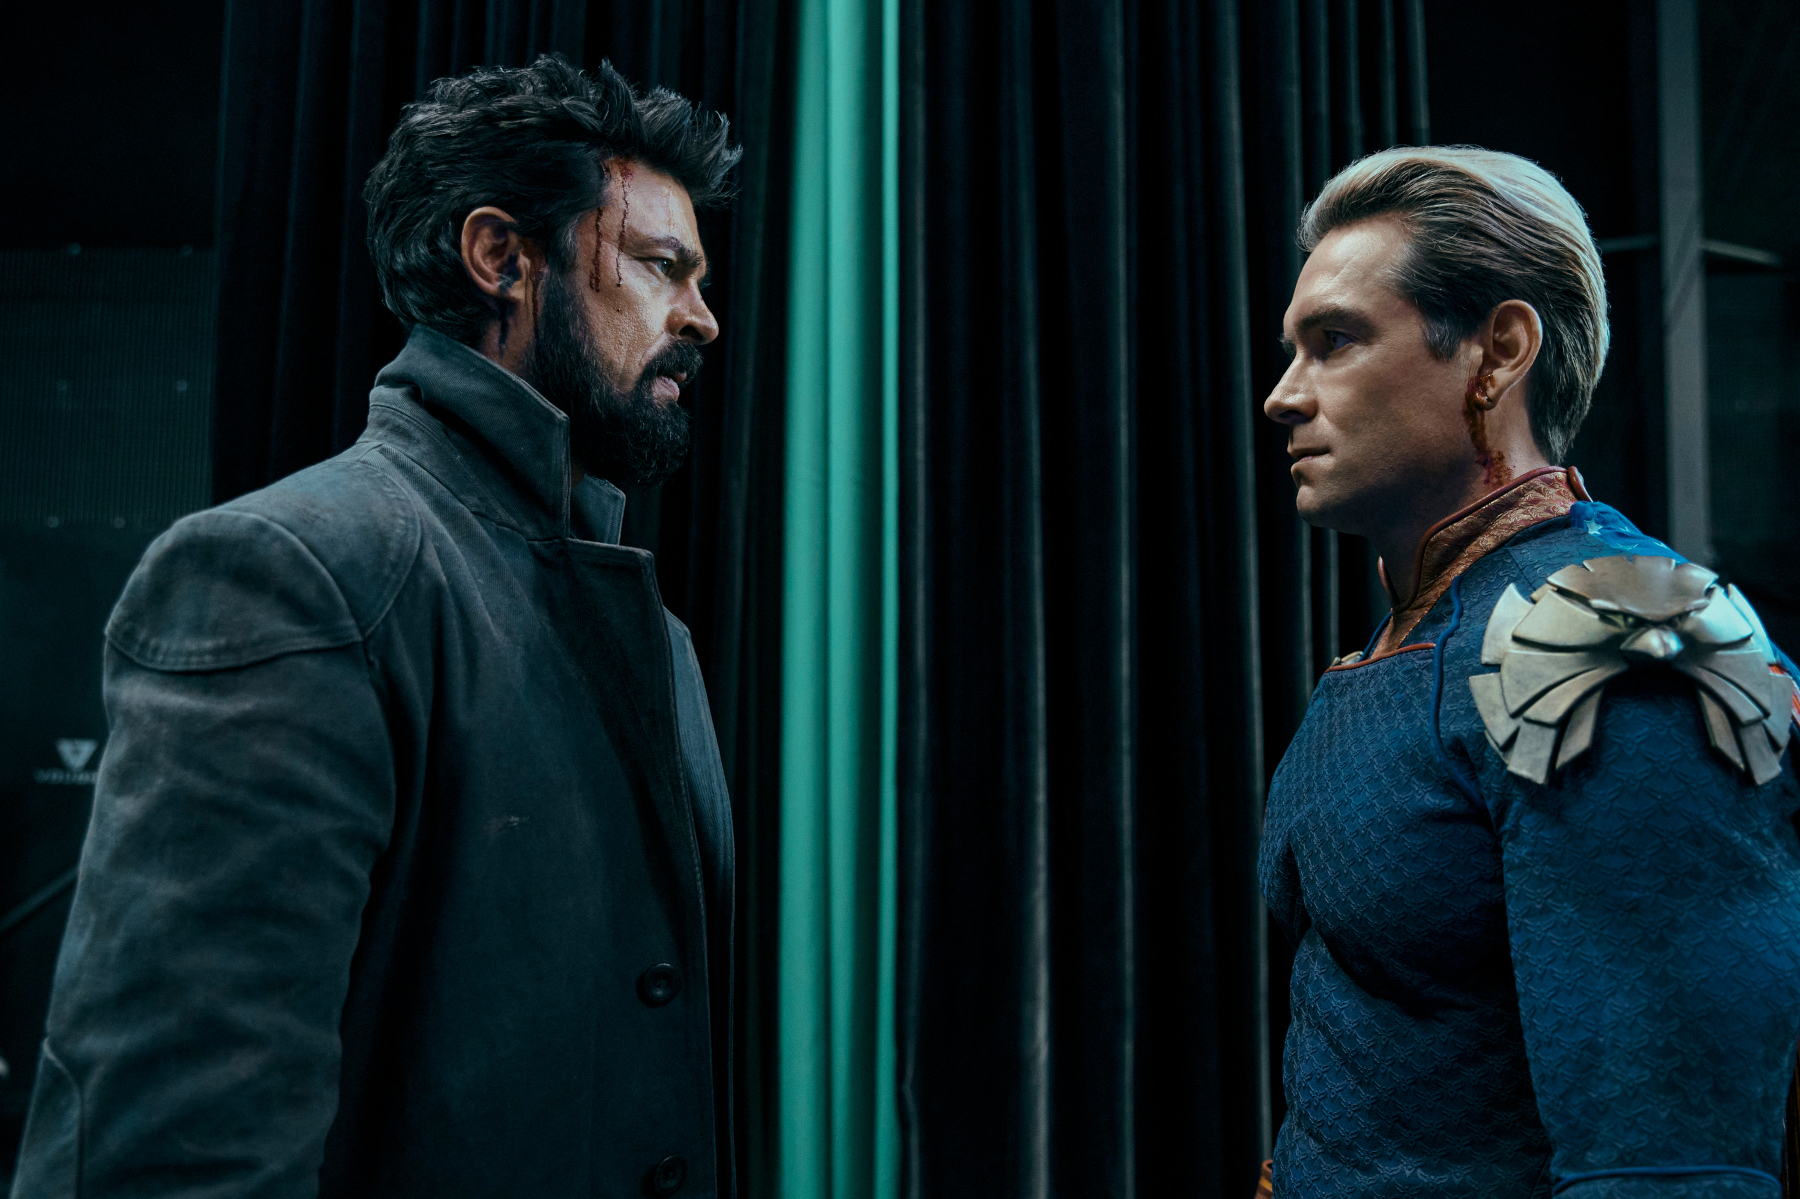 Karl Urban and Antony Starr in 'The Boys' Season 3 for our article about best superhero shows of 2022.